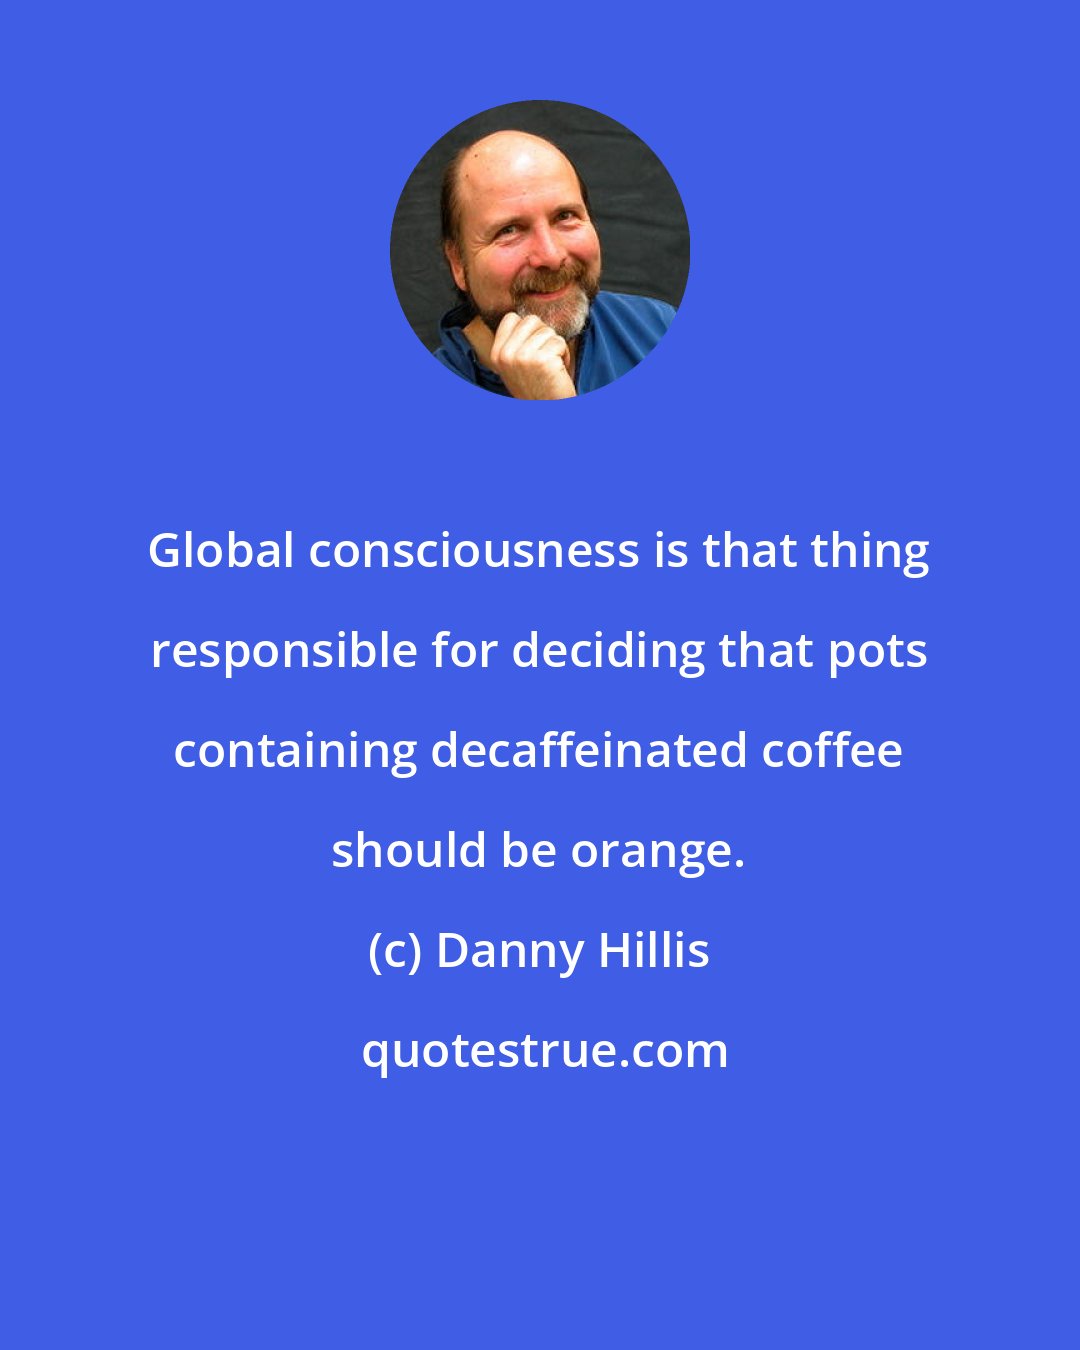 Danny Hillis: Global consciousness is that thing responsible for deciding that pots containing decaffeinated coffee should be orange.